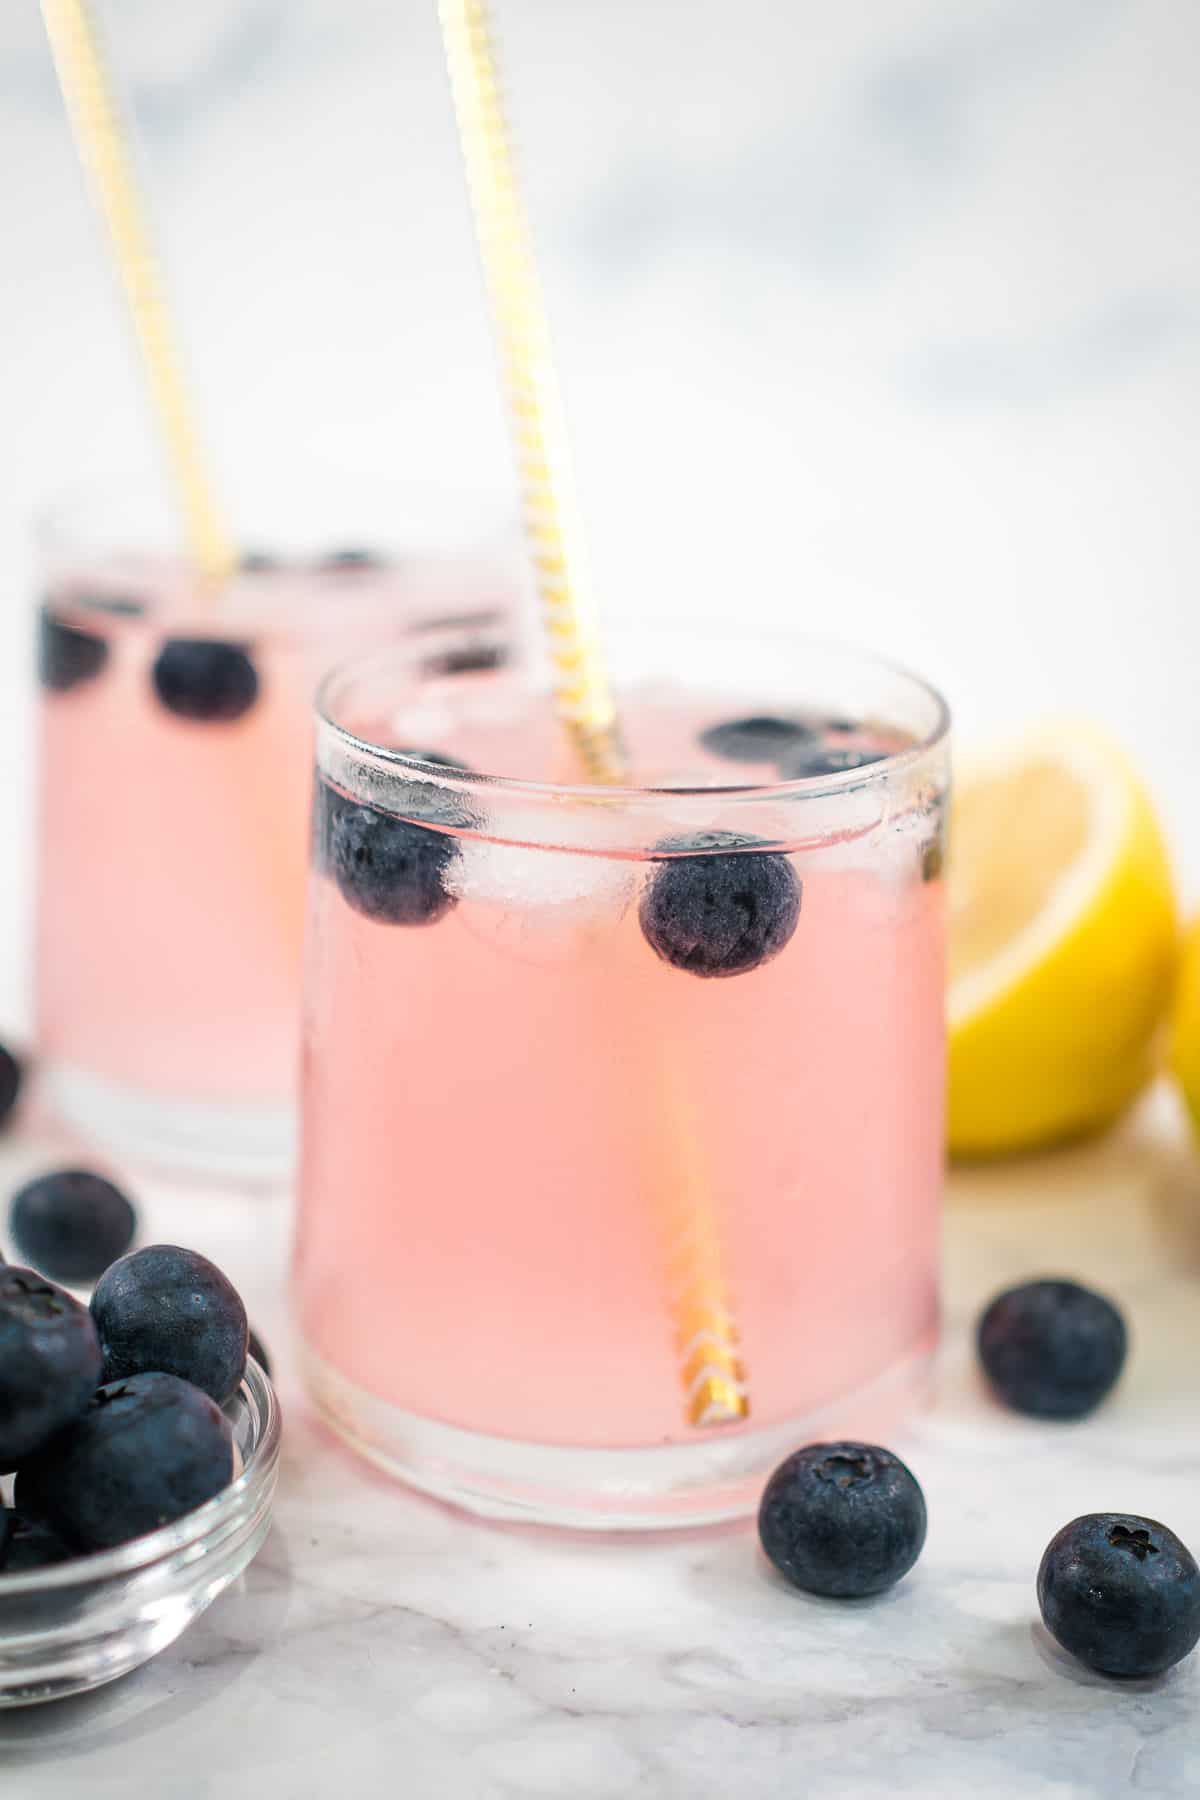 Two glasses of pink drink with blueberries and ice cubes.